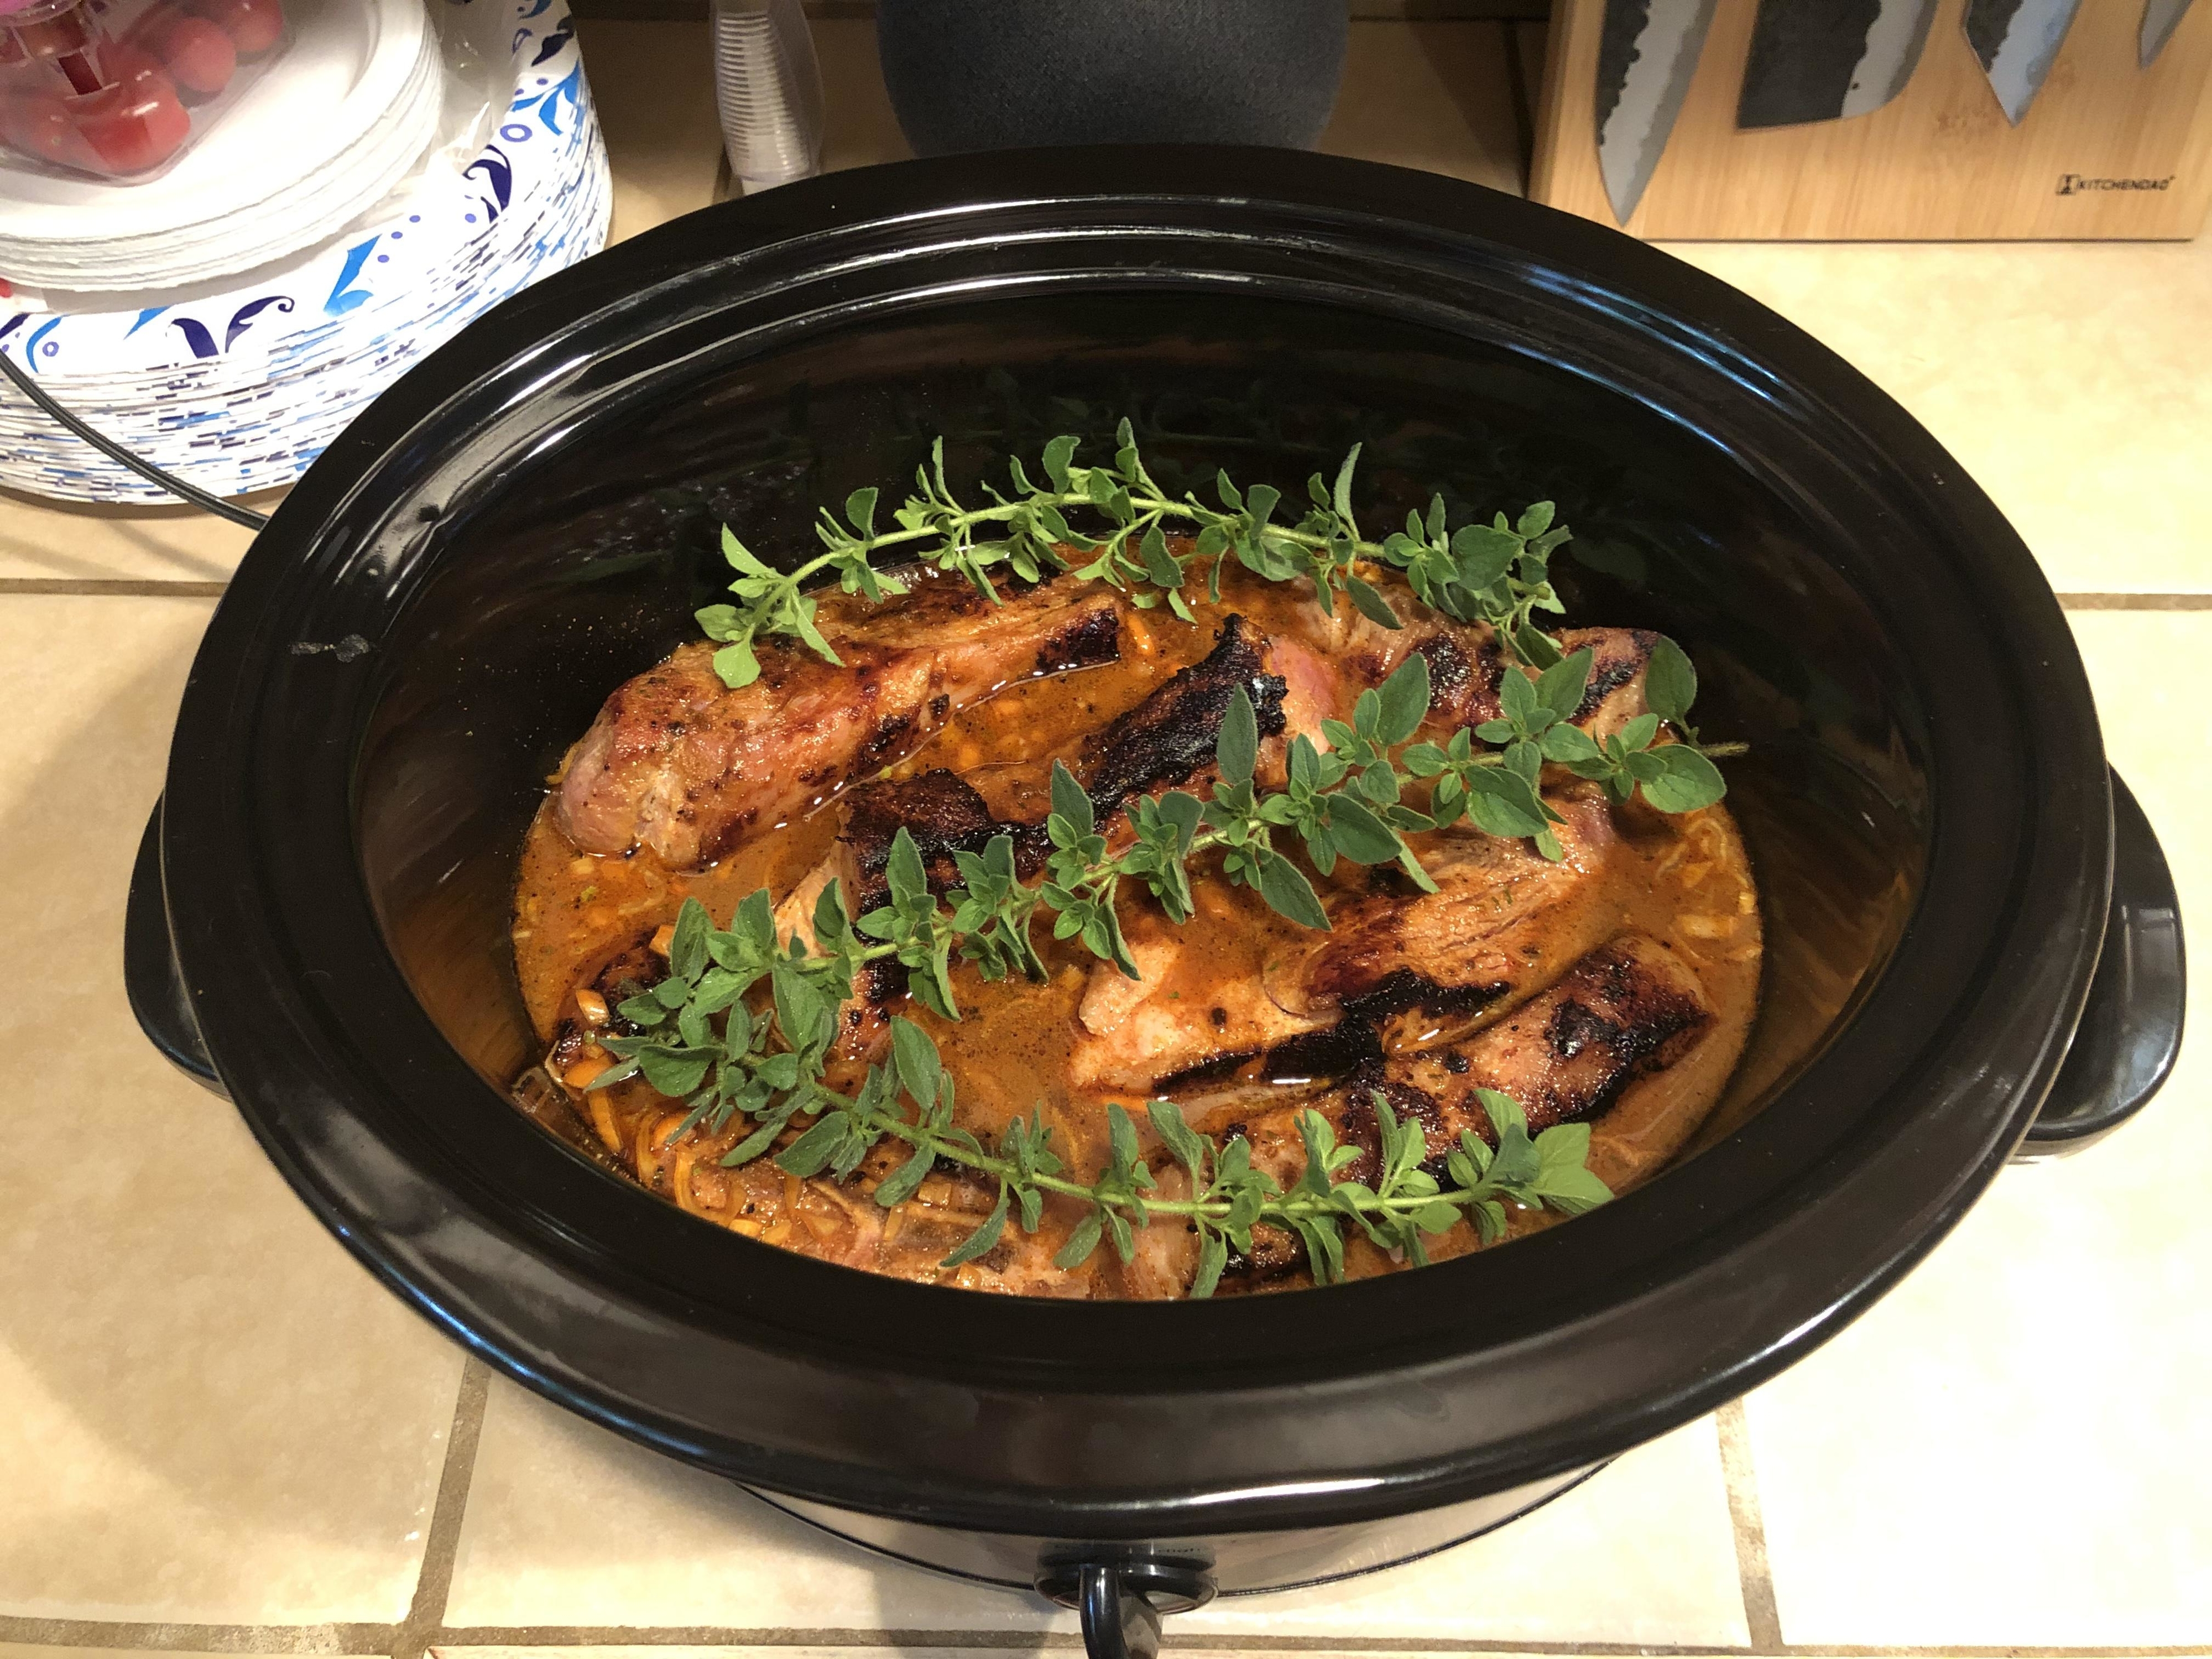 Pork ribs in a slow cooker garnished with fresh herbs